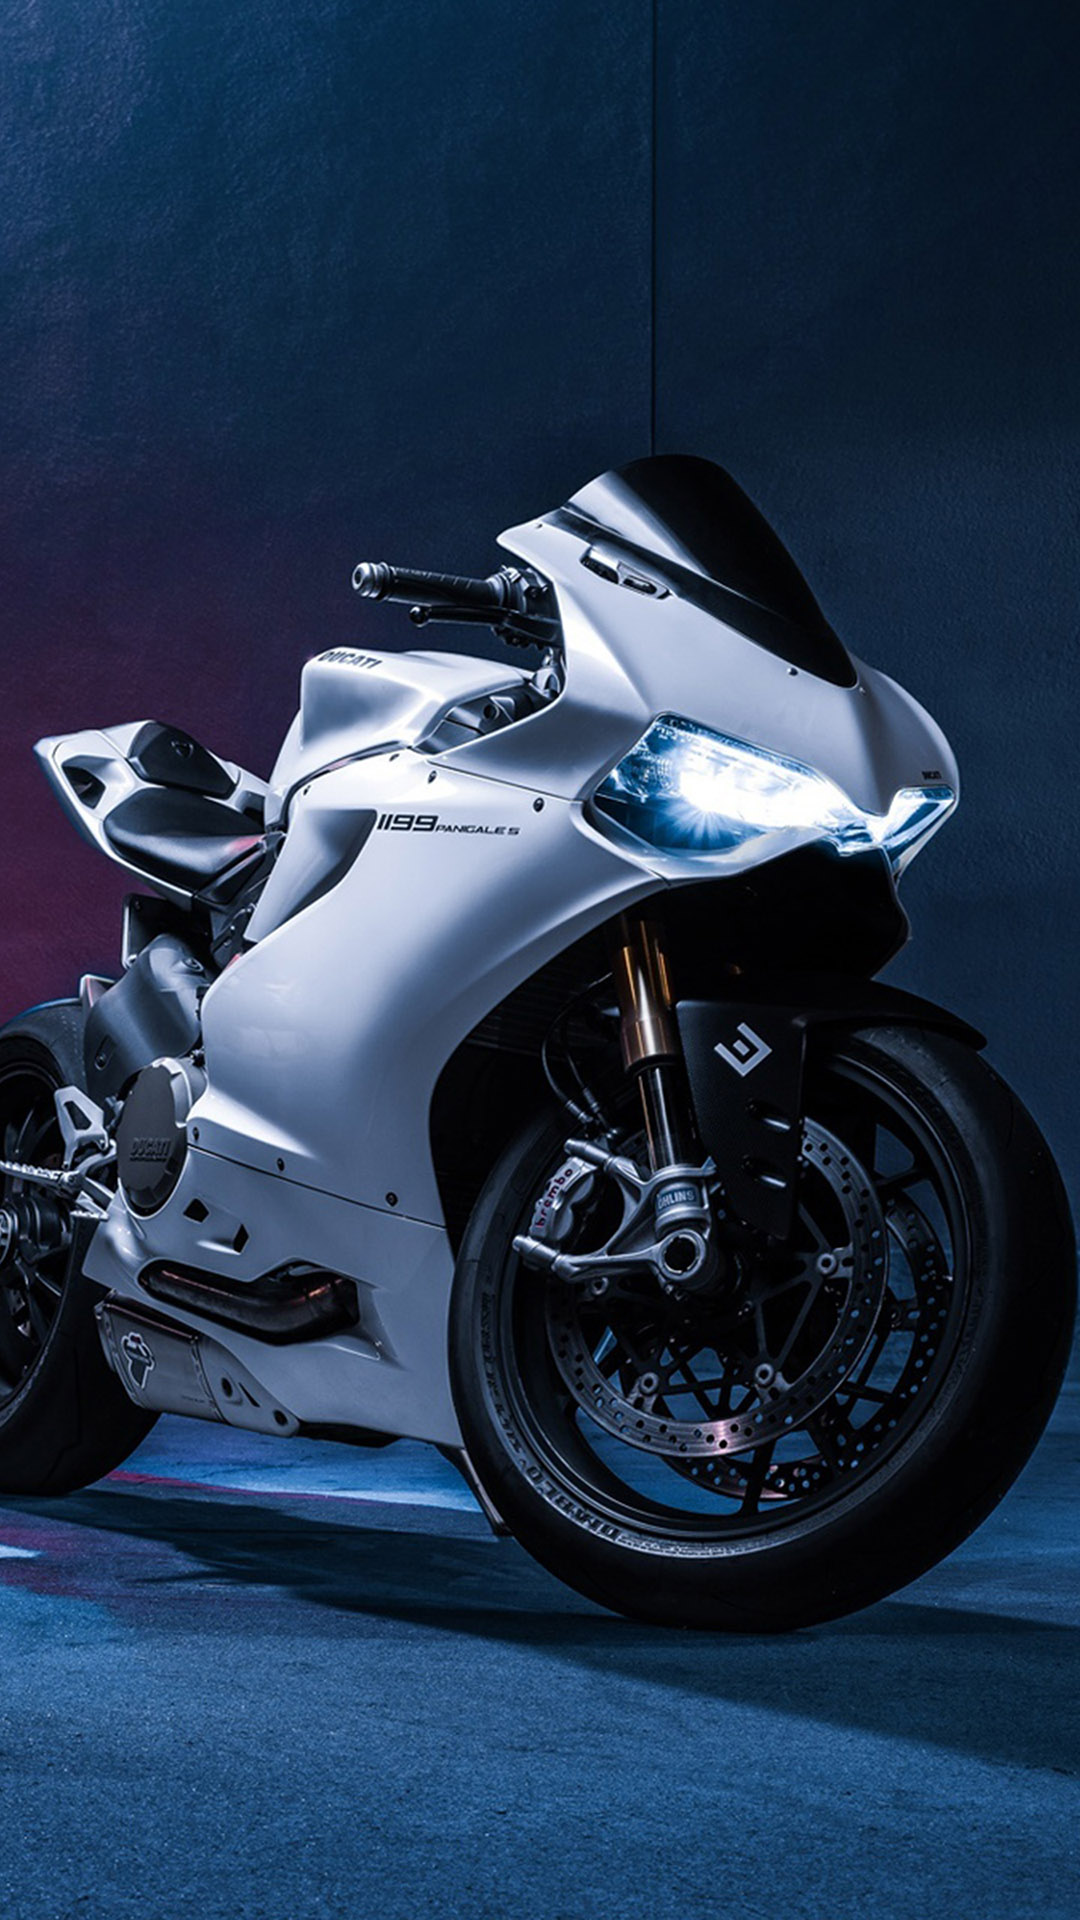 Hd Background Ducati 1199 Panigale S Bike White Front - Ducati Bikes Hd  Wallpapers For Mobile - 1080x1920 Wallpaper 